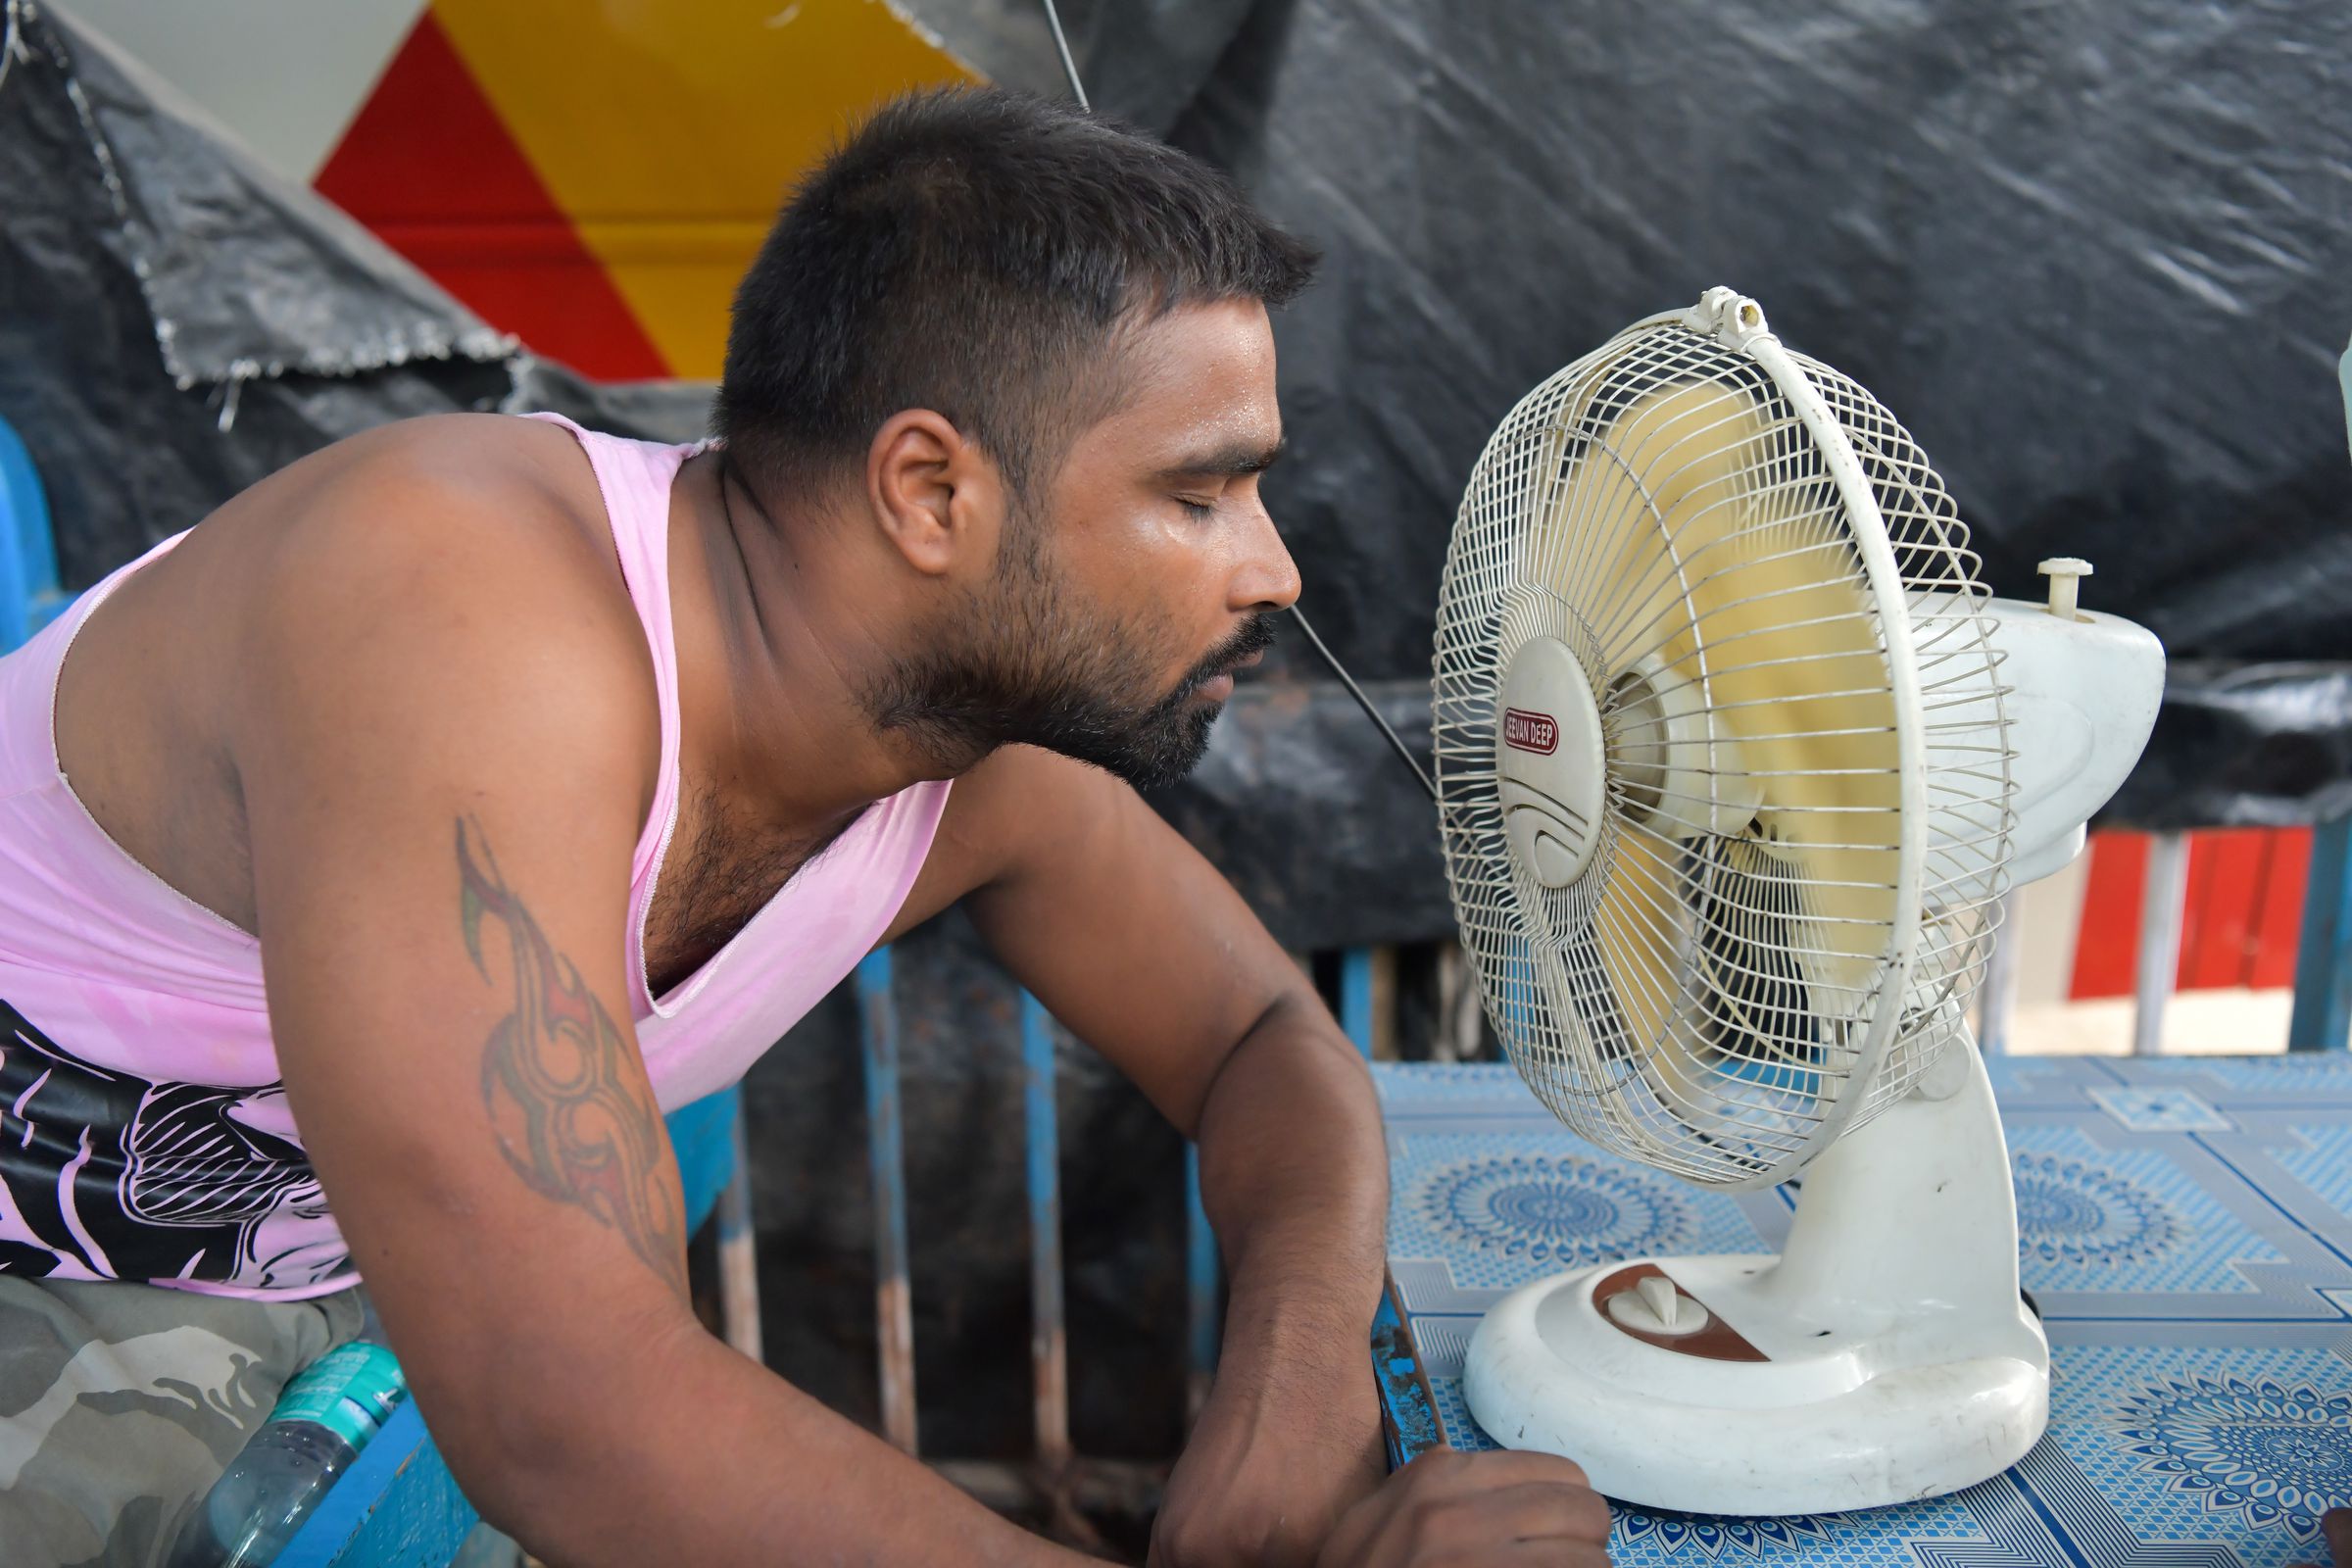 A man is seen taking a break from work cooling himself down...